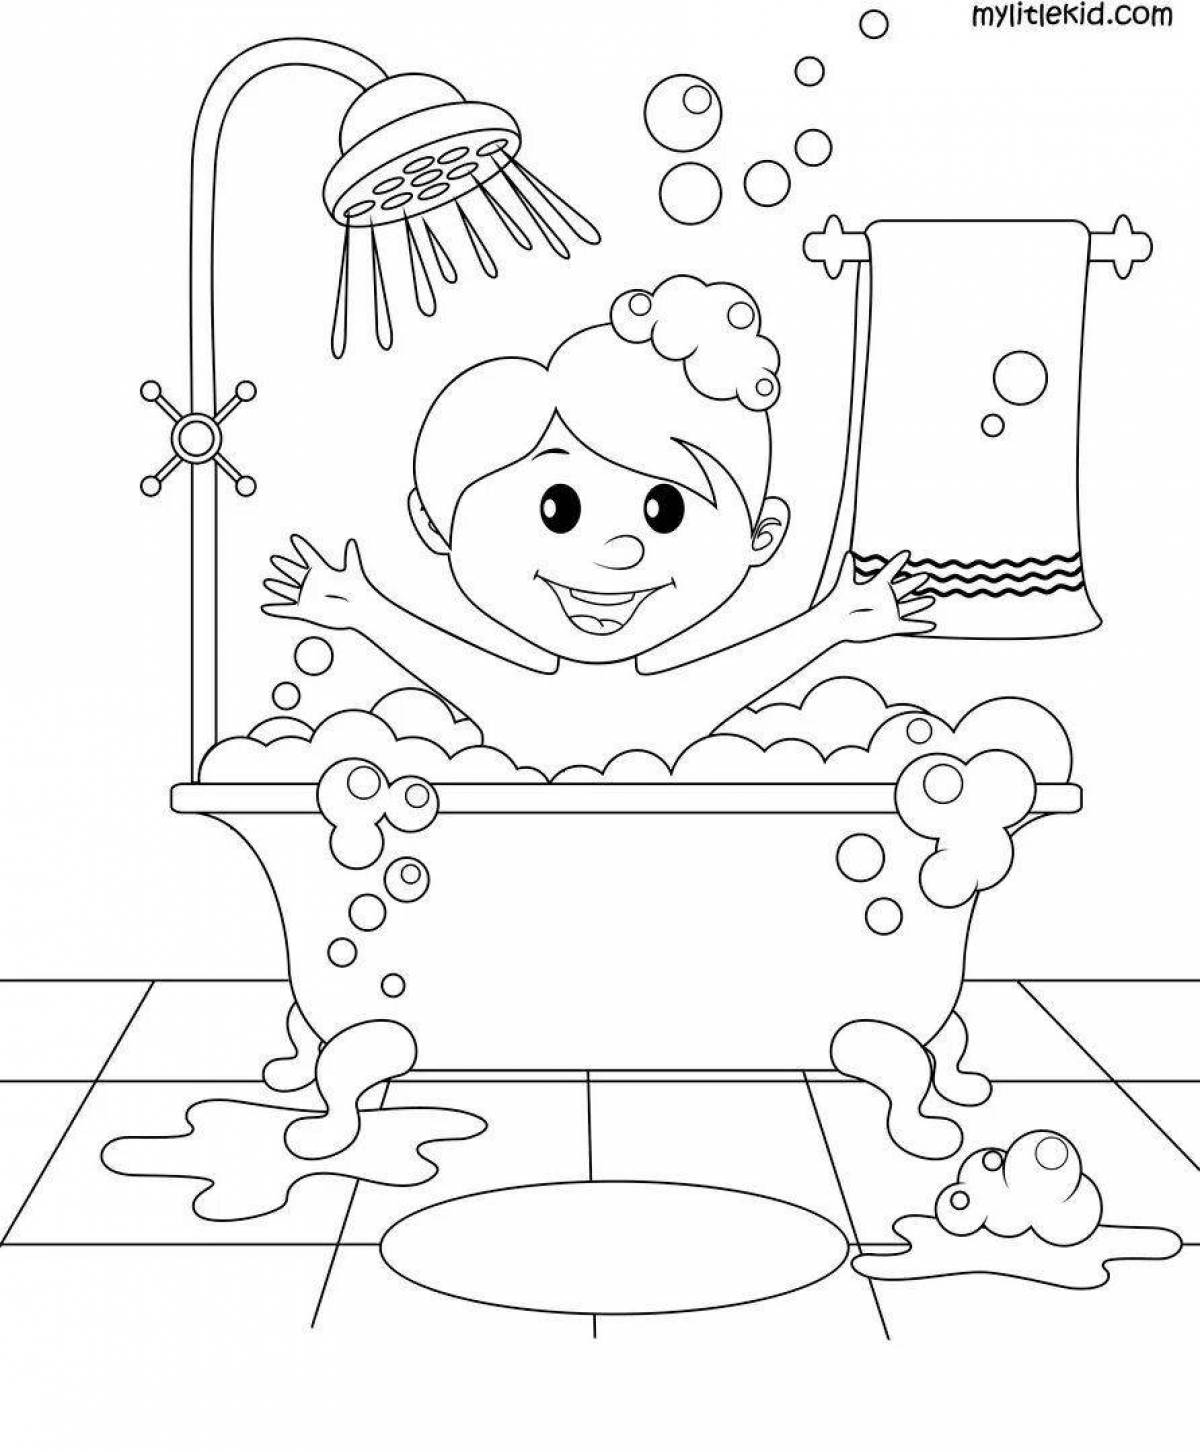 Amazing bathtub coloring book for kids